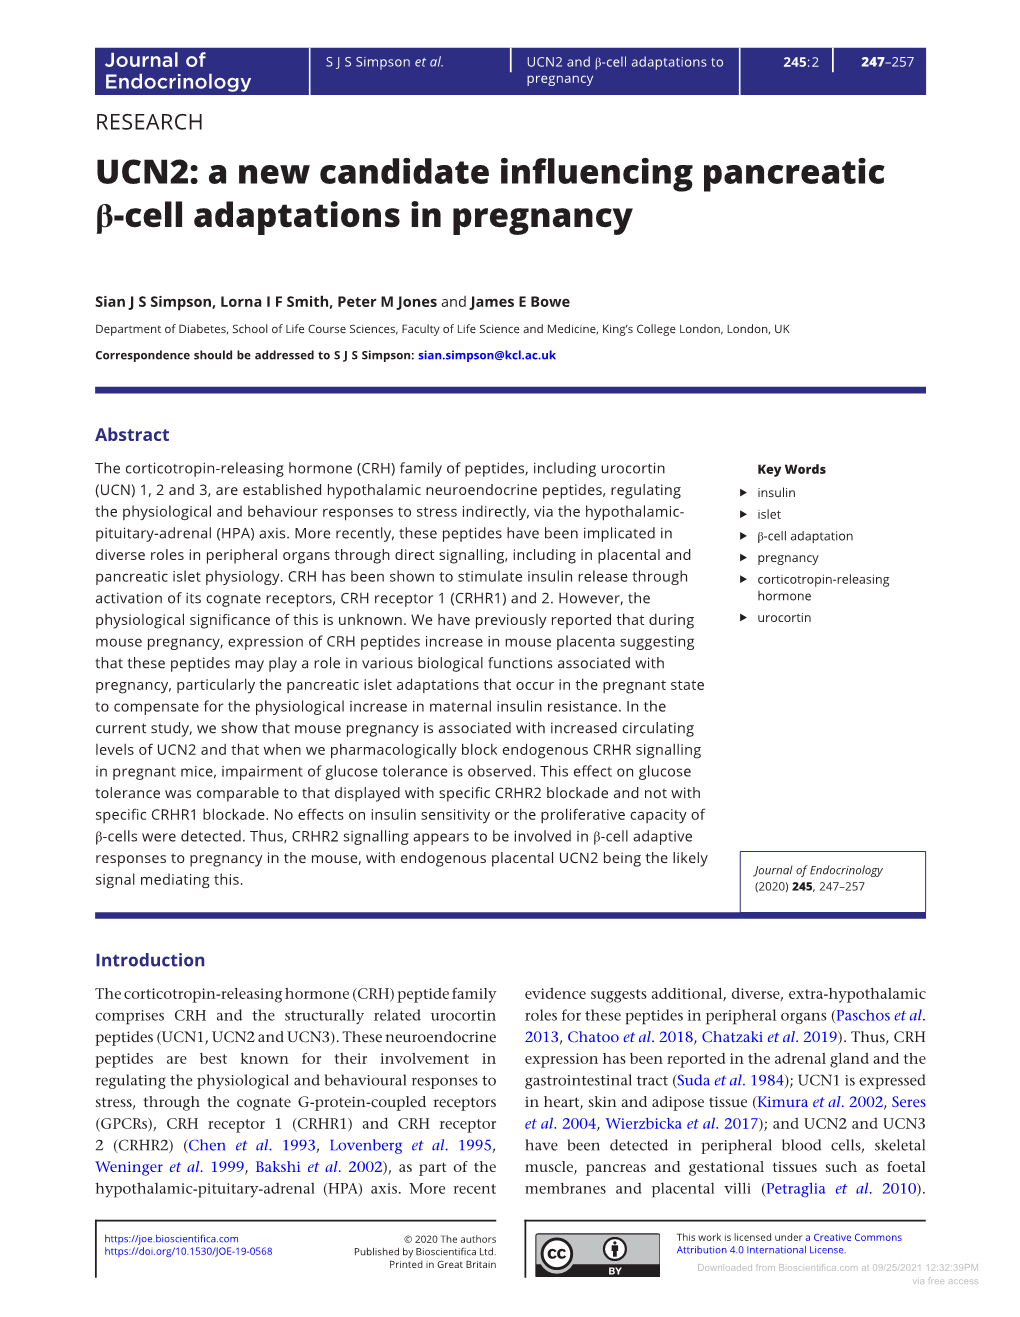 UCN2: a New Candidate Influencing Pancreatic Β-Cell Adaptations in Pregnancy